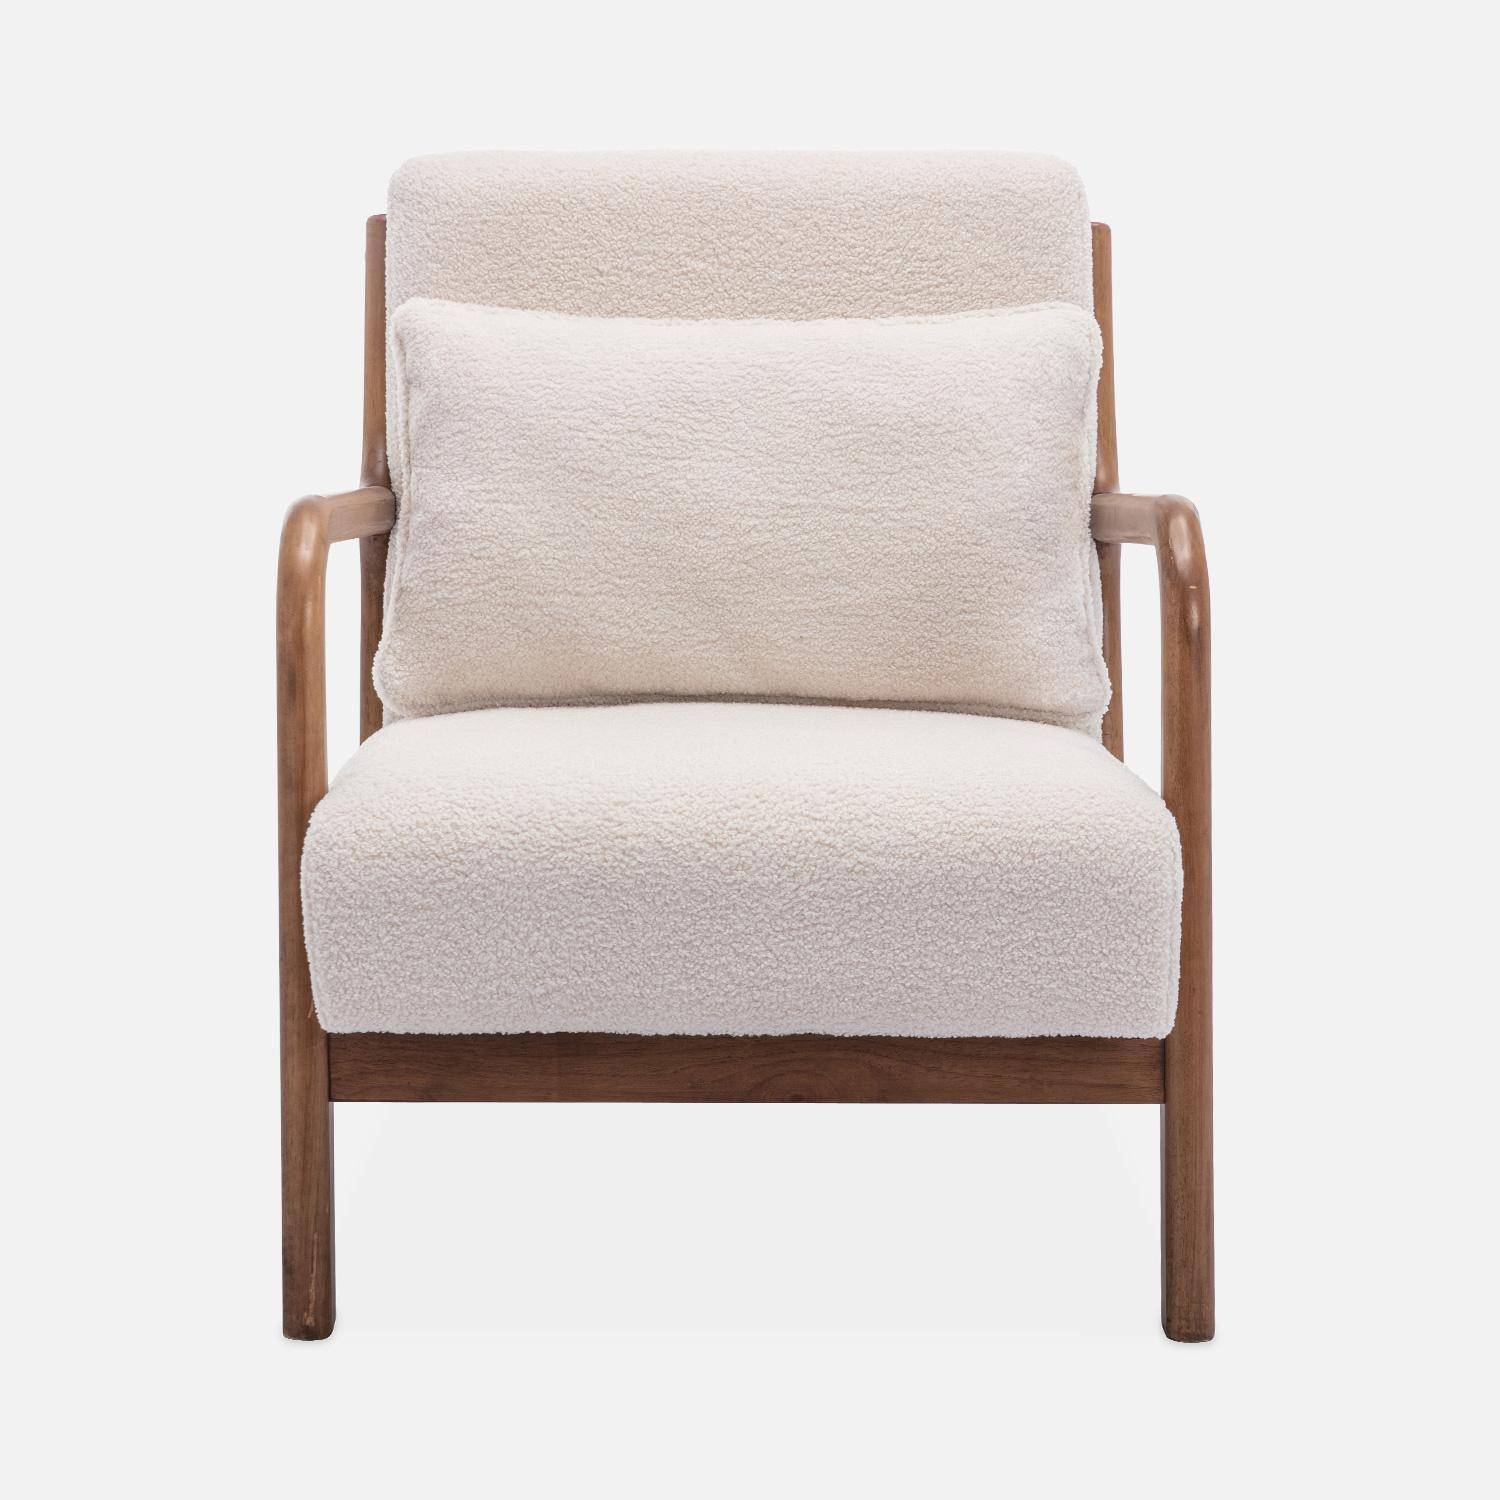 Cosy boucle wooden armchair with scandi-style compass legs and cushion, Light Walnut Stained Hevea Wood, Lorens, White,sweeek,Photo4